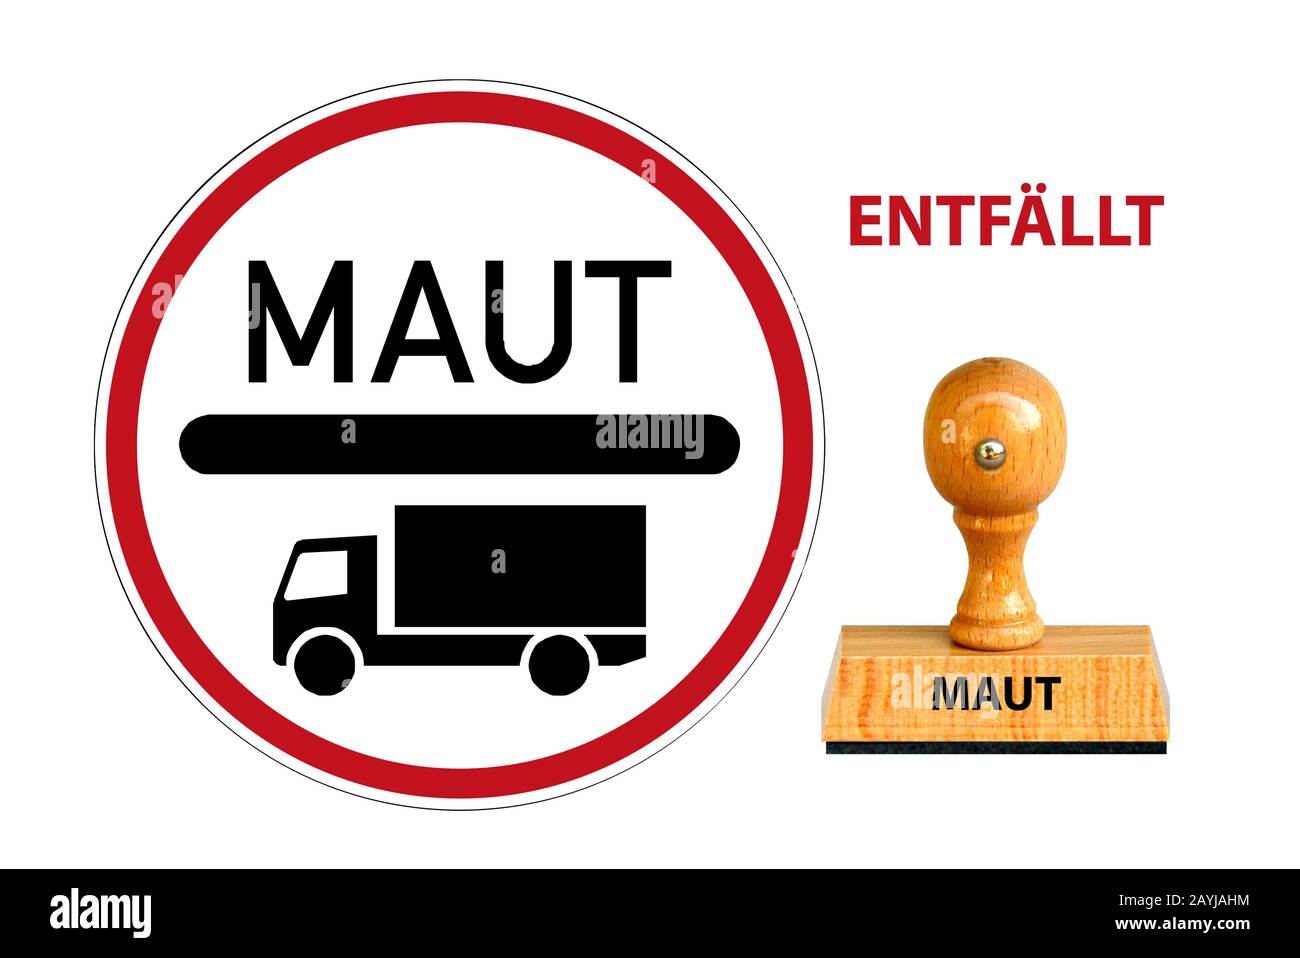 stamp lettering Maut, toll, Maut sign and the word entfaellt, is dropped, Germany Stock Photo